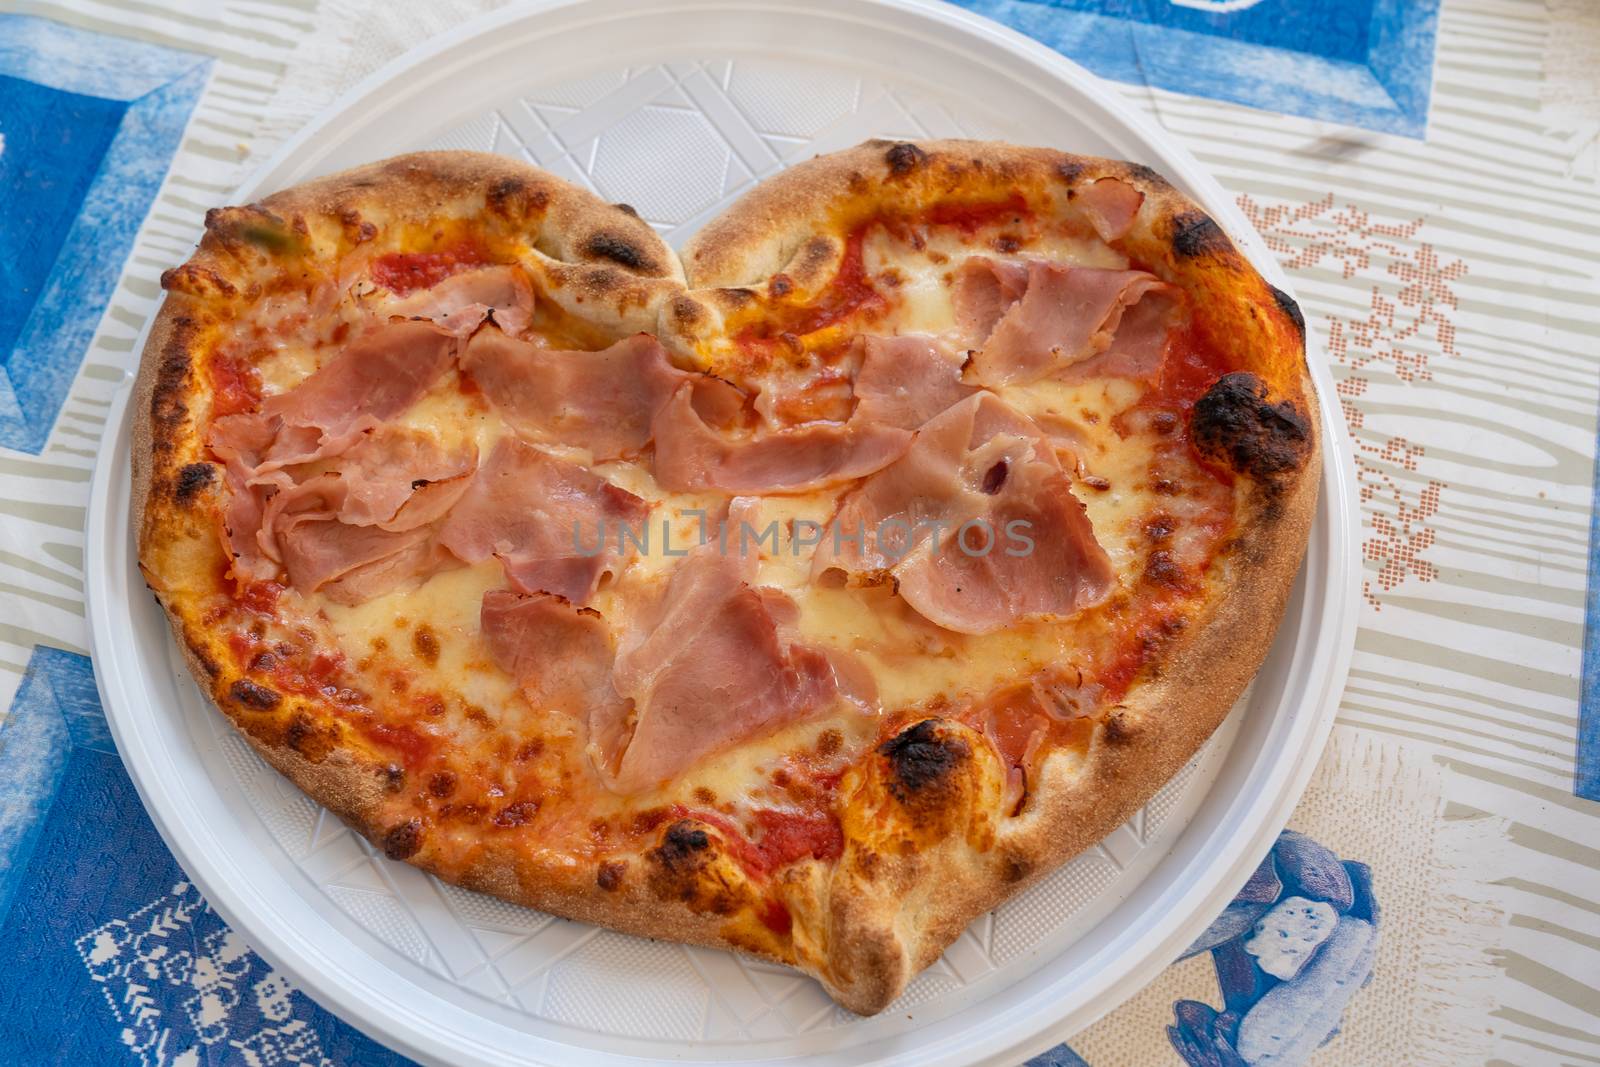 Heart shaped pizza with tomatoes and ham for Valentines Day on white plastic plate on the table,Food concept of romantic love